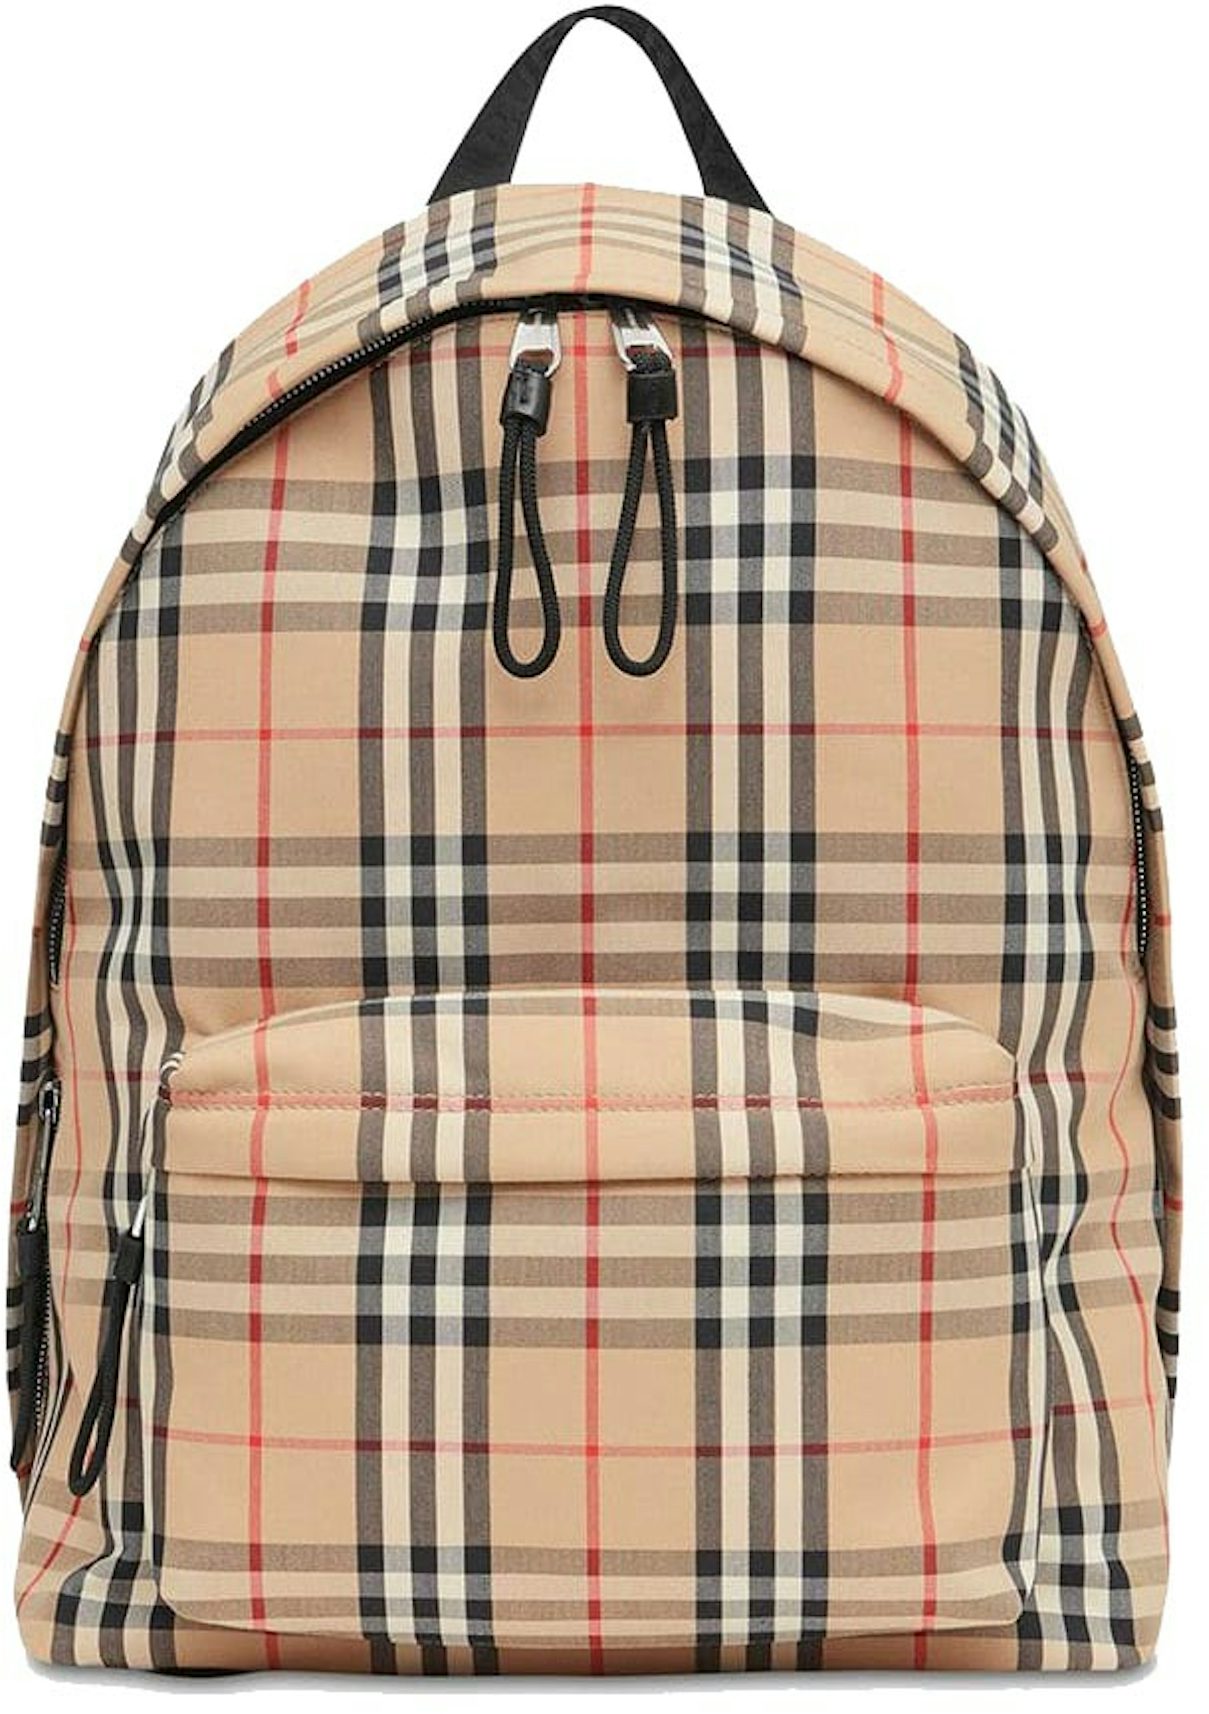 Burberry Small Nico Check Backpack Canvas/Leather in Archive Beige